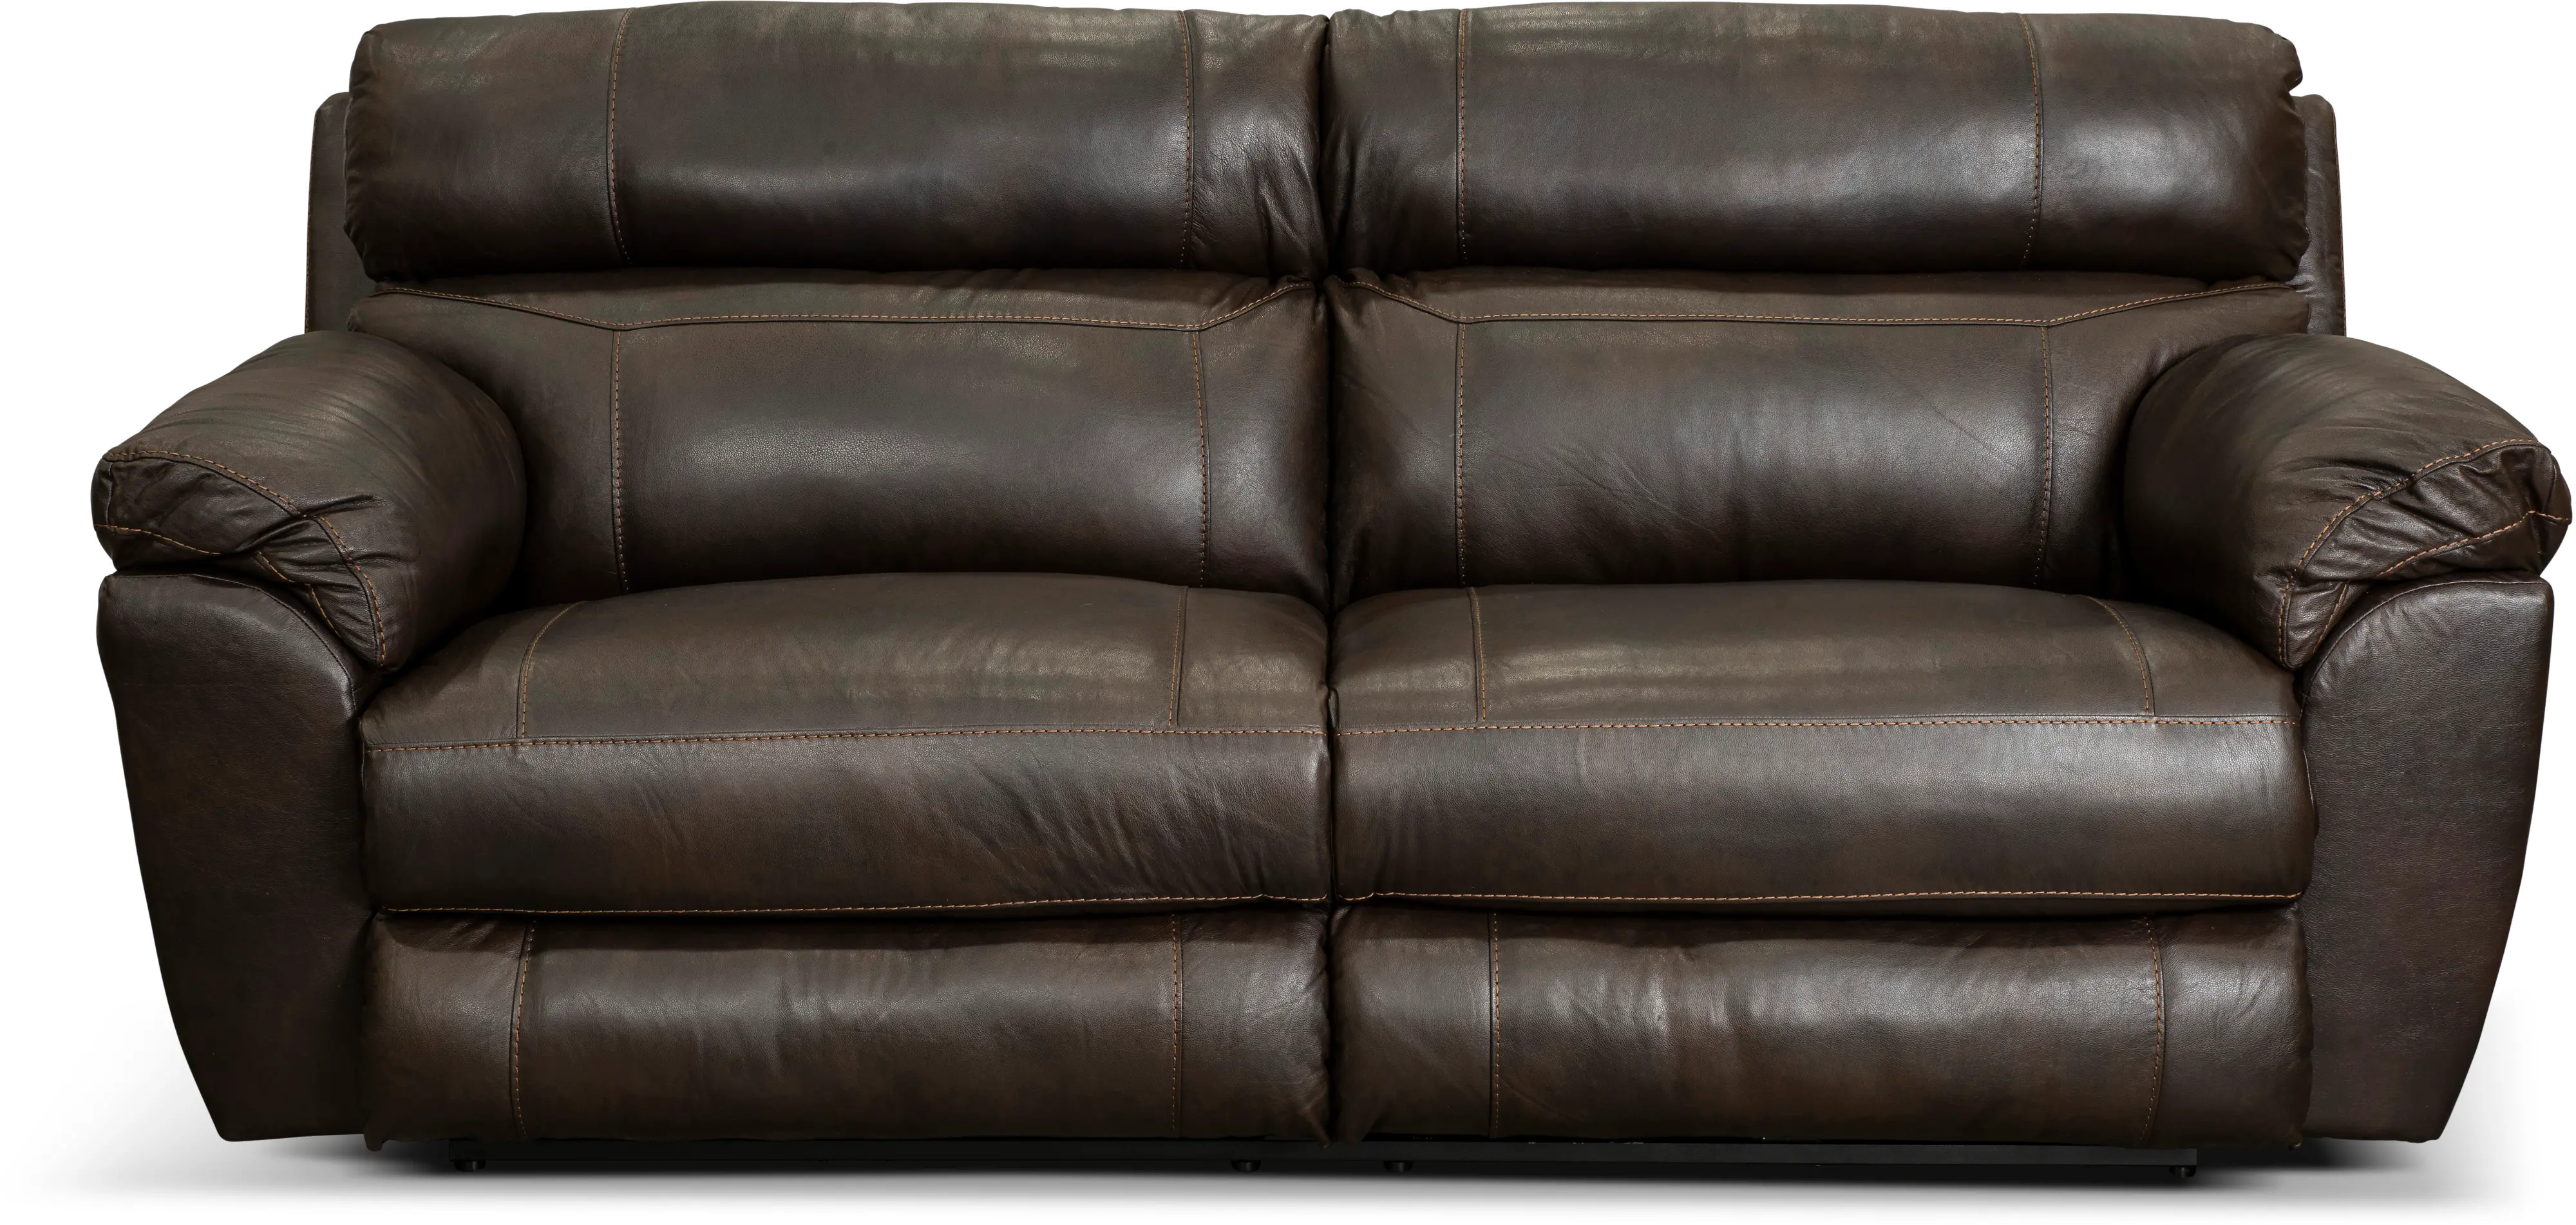 https://static.rcwilley.com/products/112075533/Costa-Brown-Leather-Lay-Flat-Power-Reclining-Sofa-rcwilley-image1.webp